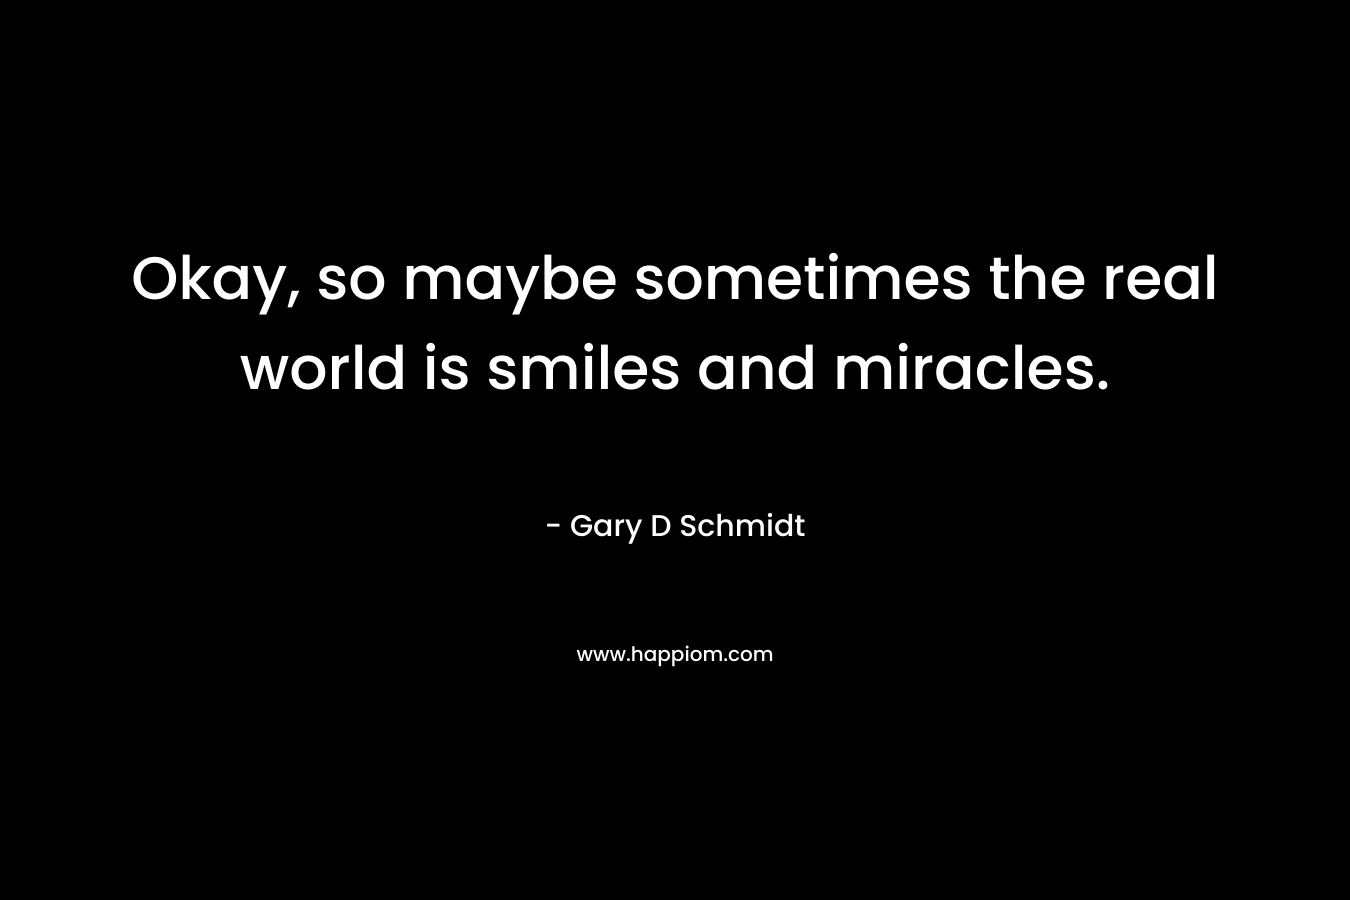 Okay, so maybe sometimes the real world is smiles and miracles. – Gary D Schmidt